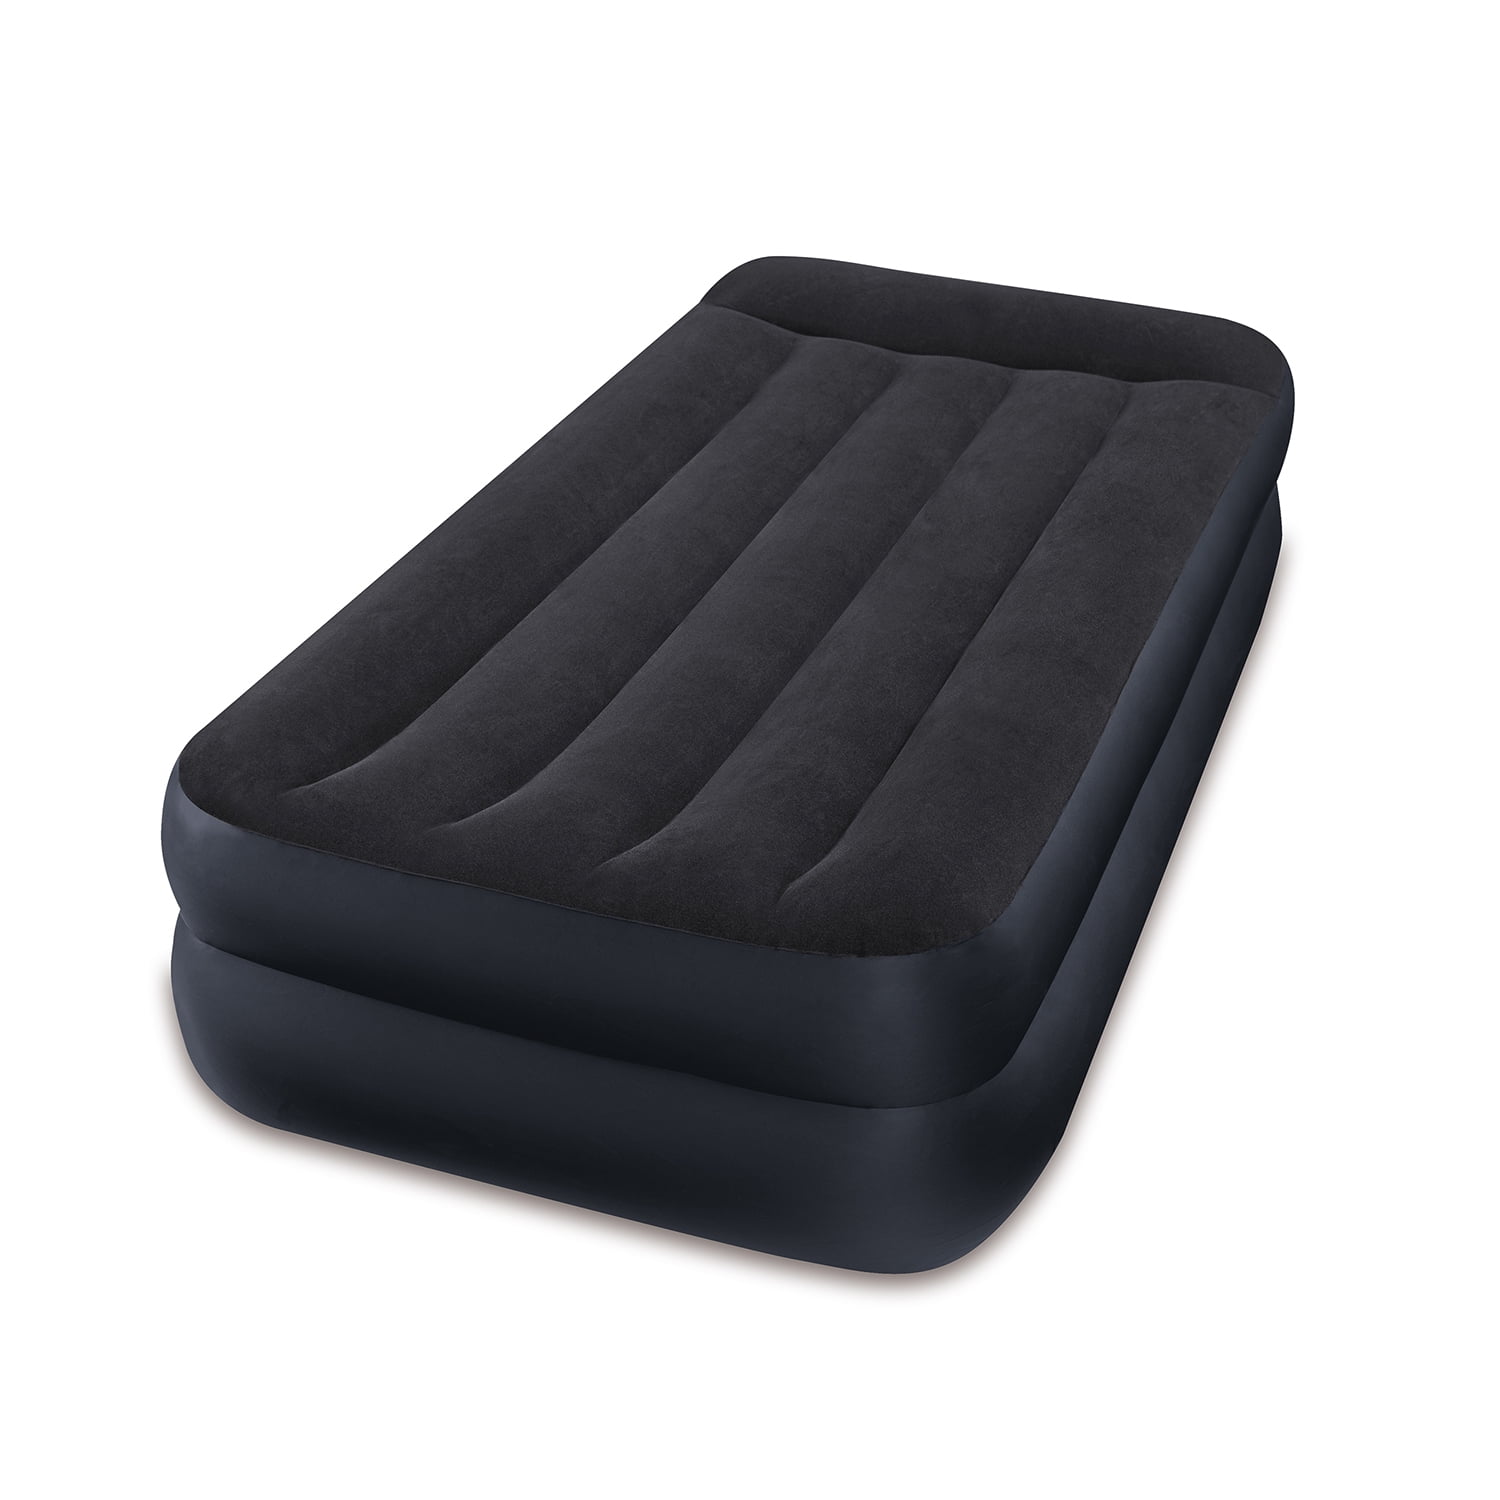 Picture of Intex 64121E Pillow Rest Raised AirBed Twin